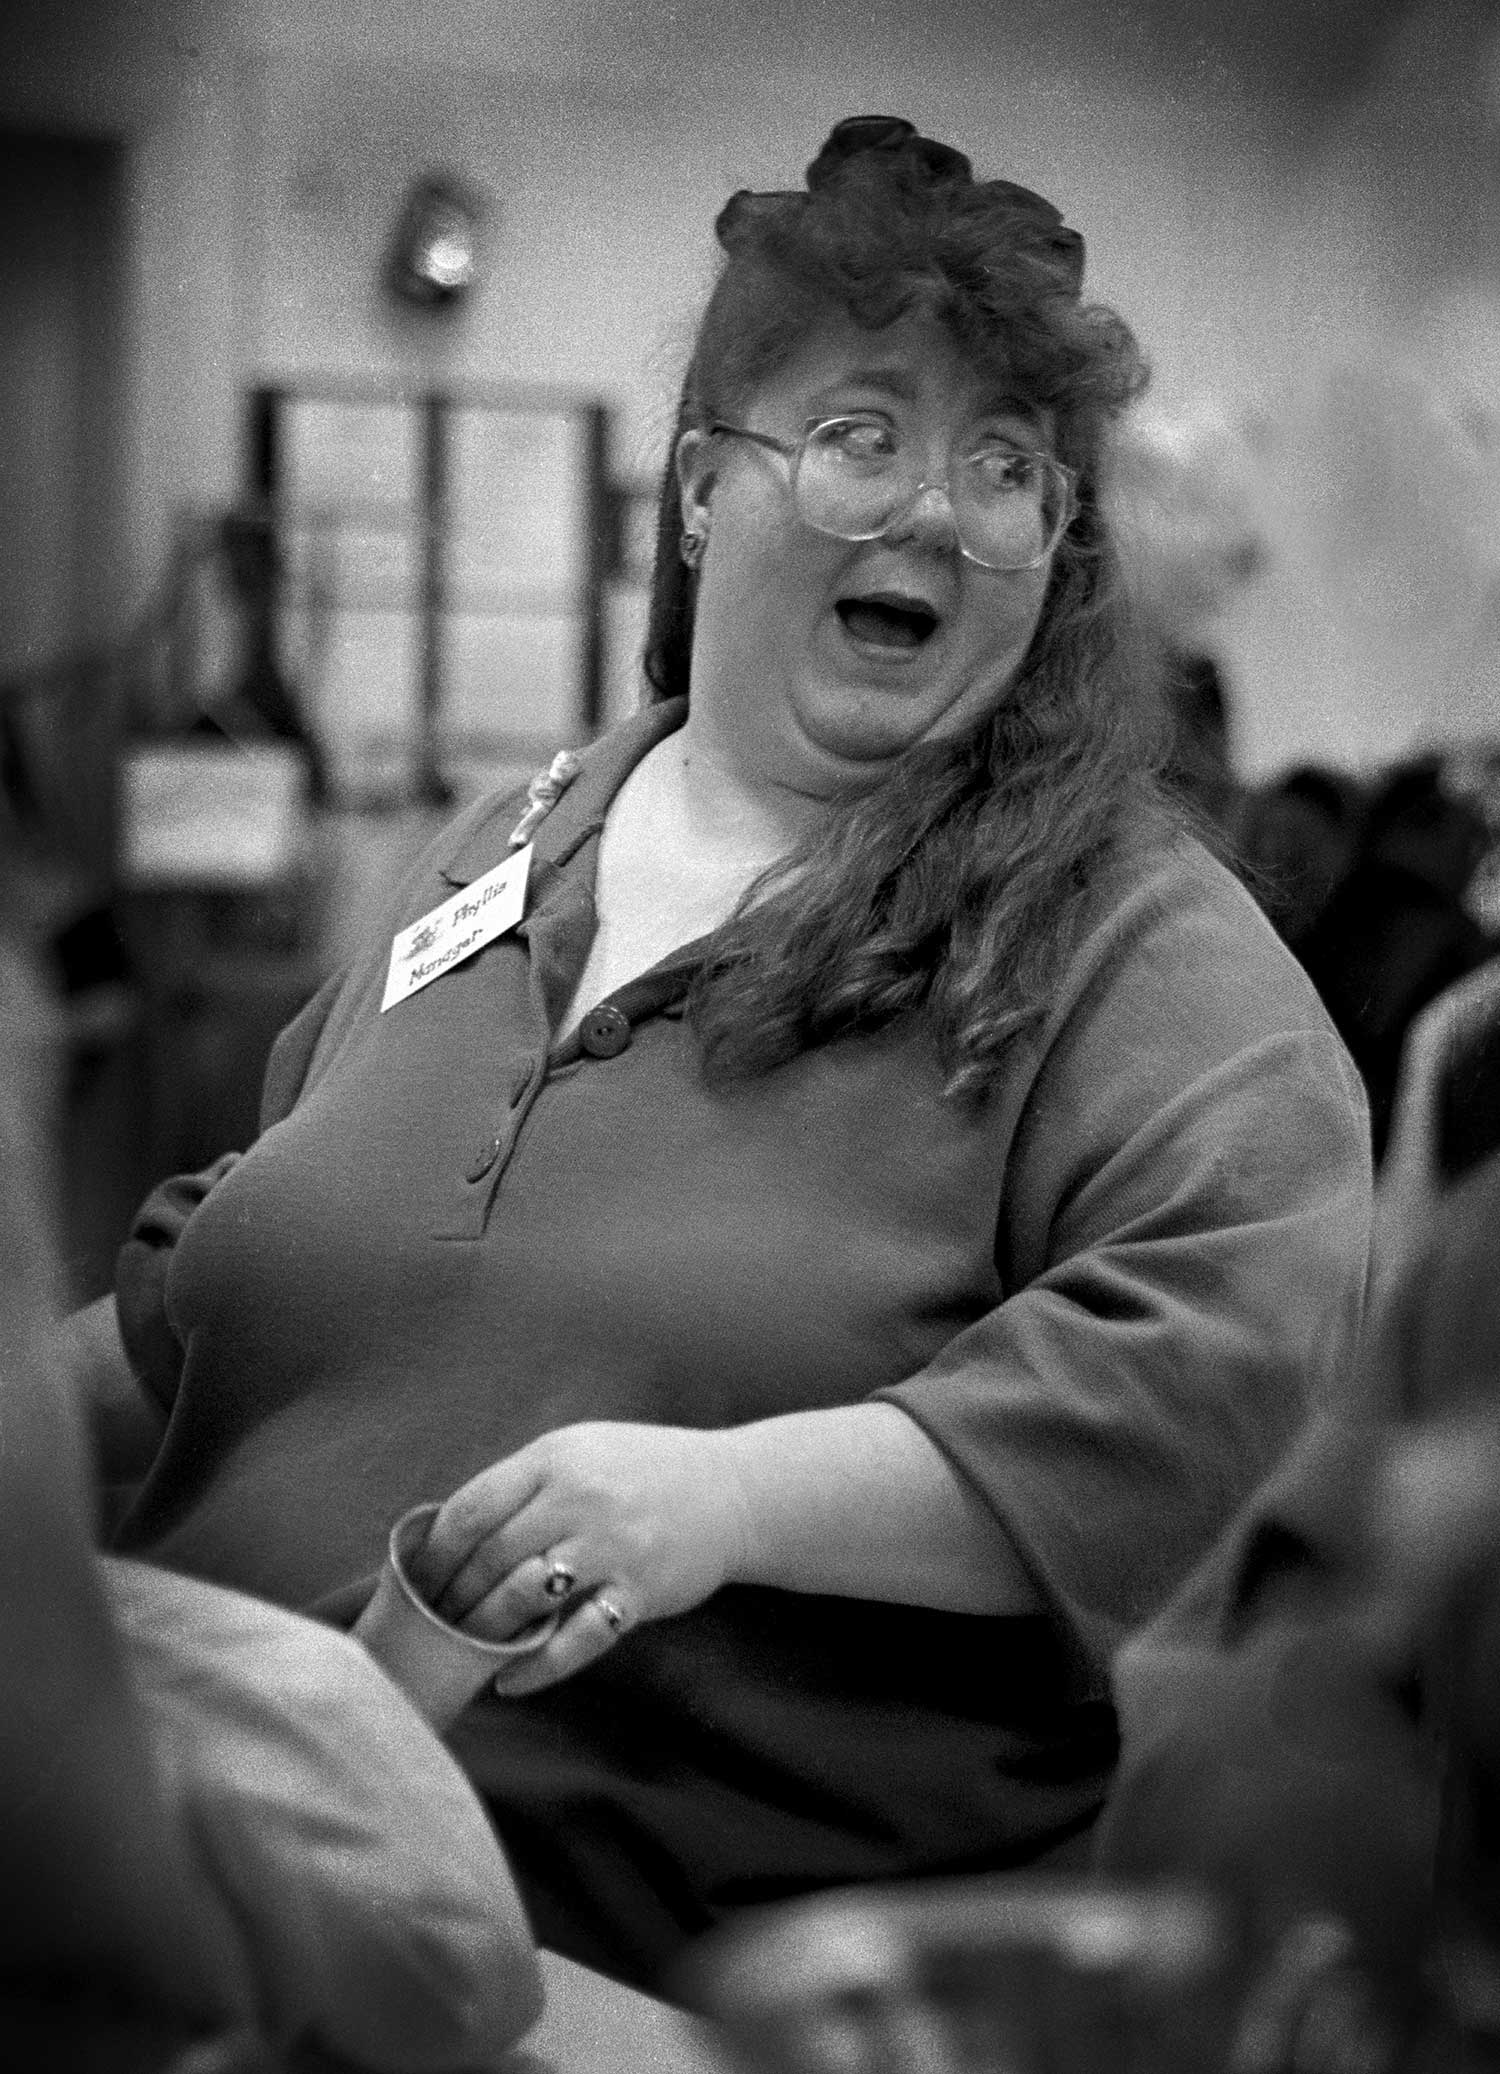 Phyllis Booth, manager of the Goodwill, laughs it up during the Teddy Bear Brigade. photo by Jessica Bocko  - 1997